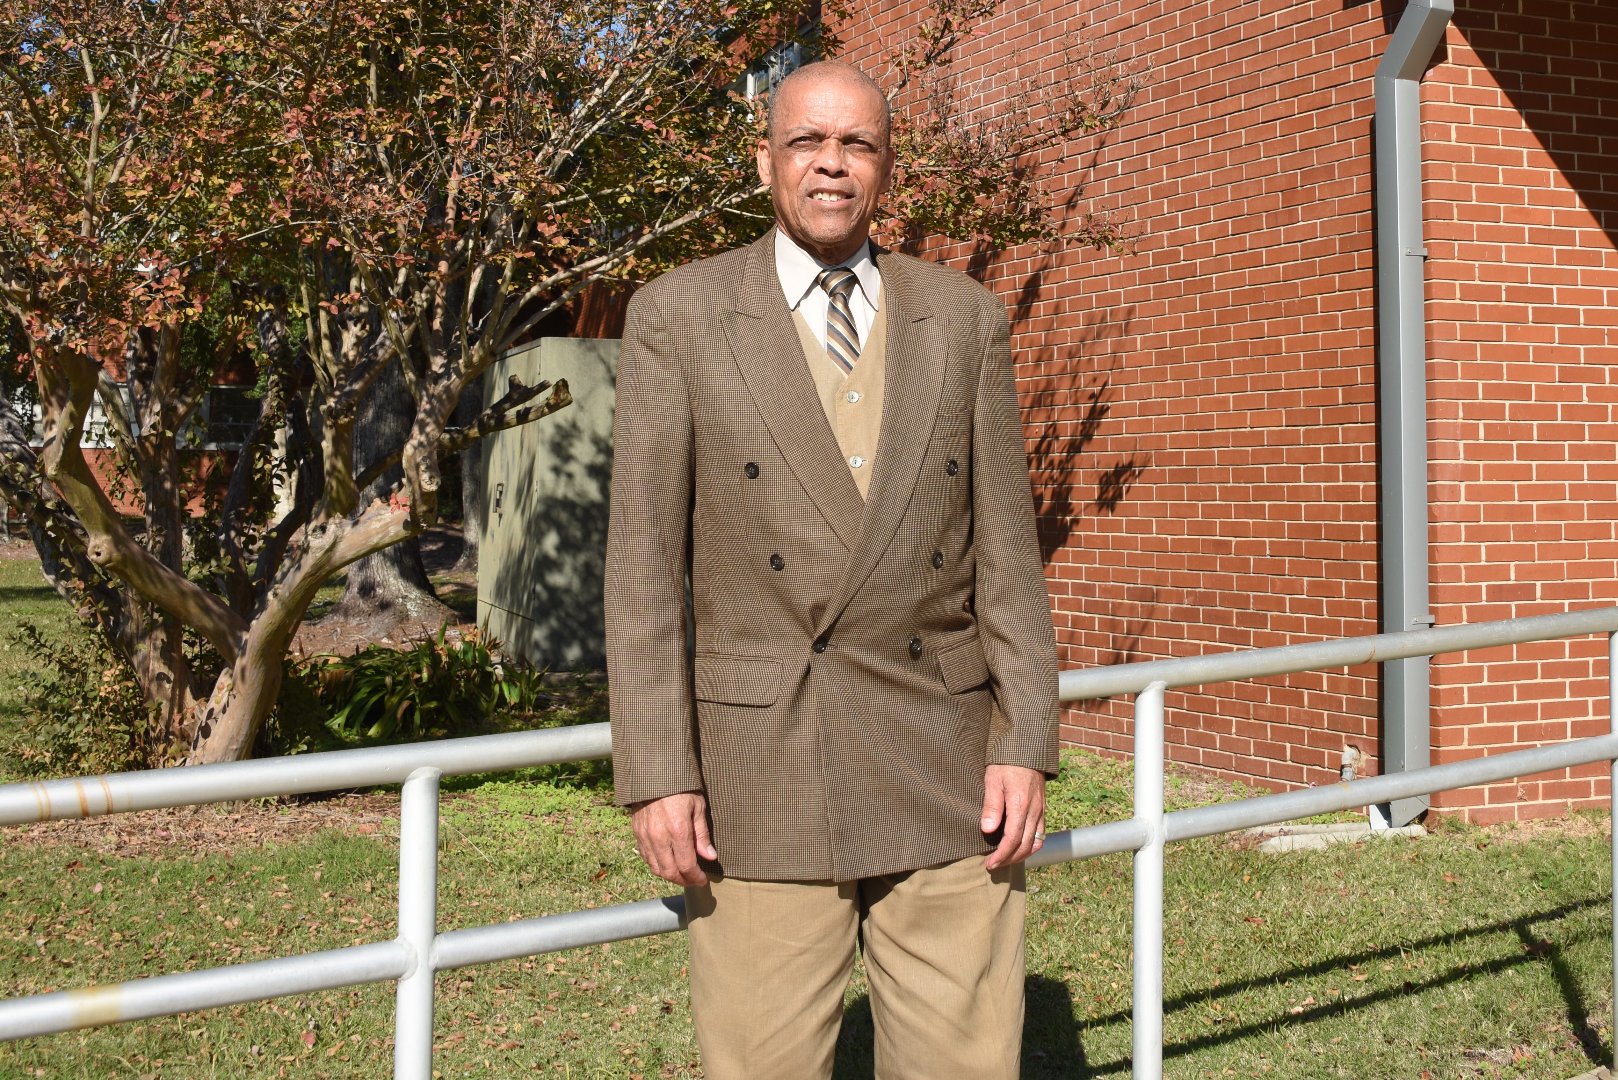 Dr. Ralph Noble is the new dean for Fort Valley State University’s College of Agriculture, Family Sciences and Technology.